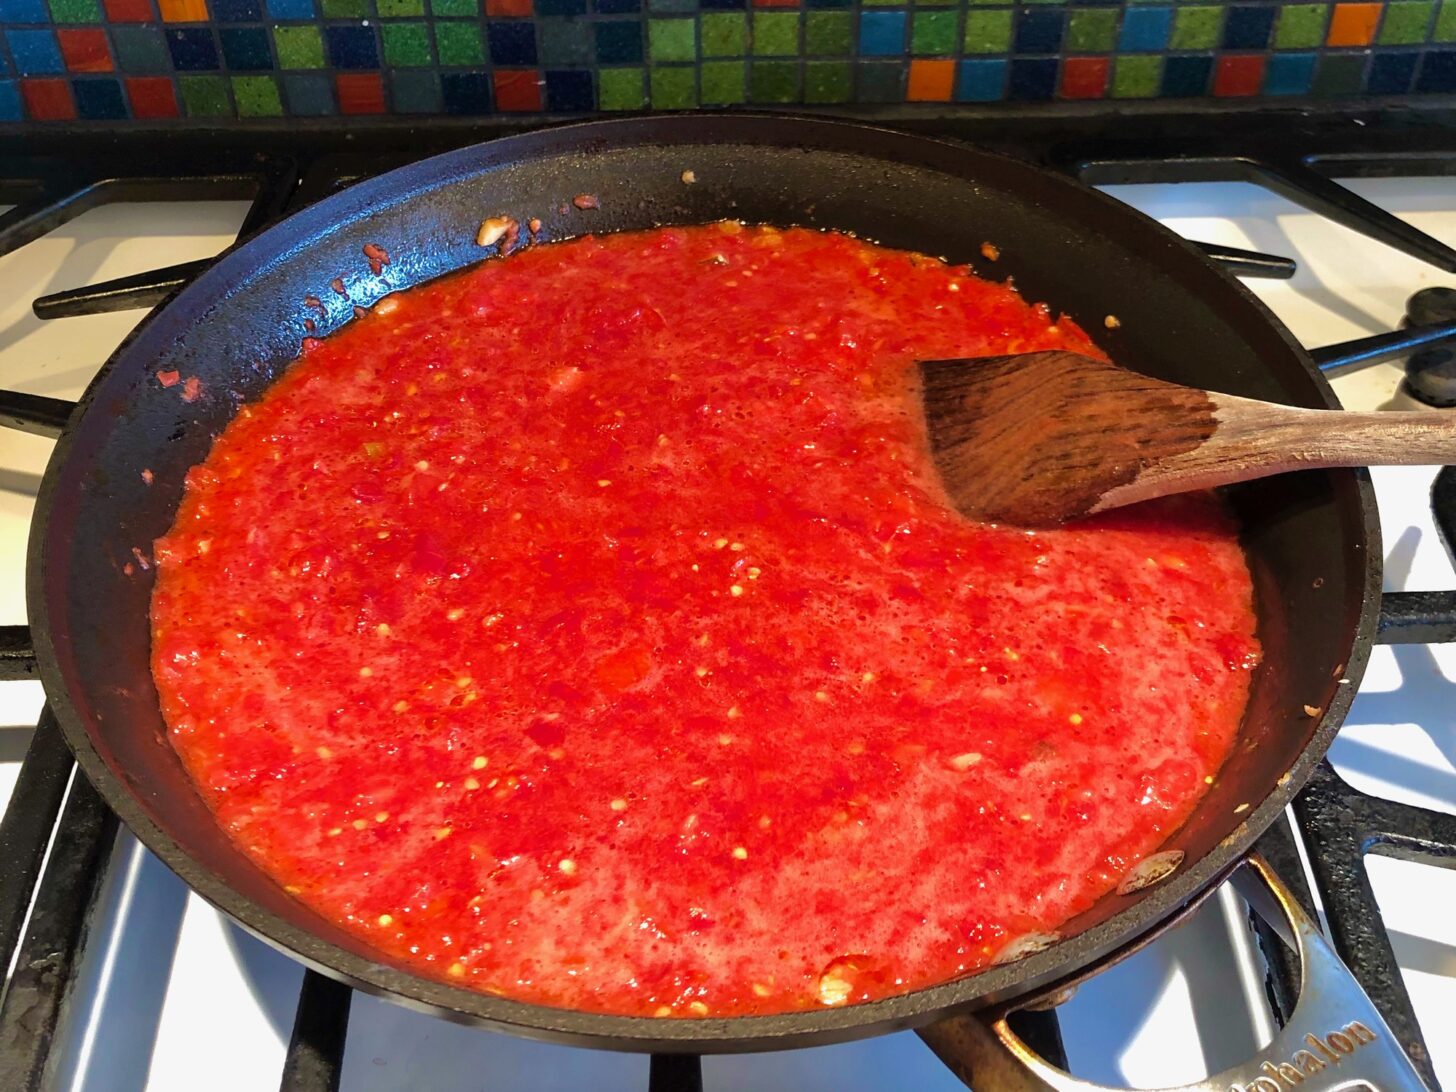 a pan of homemade tomato sauce simmers on a stove. A wooden spoon is sticking out of the sauce.